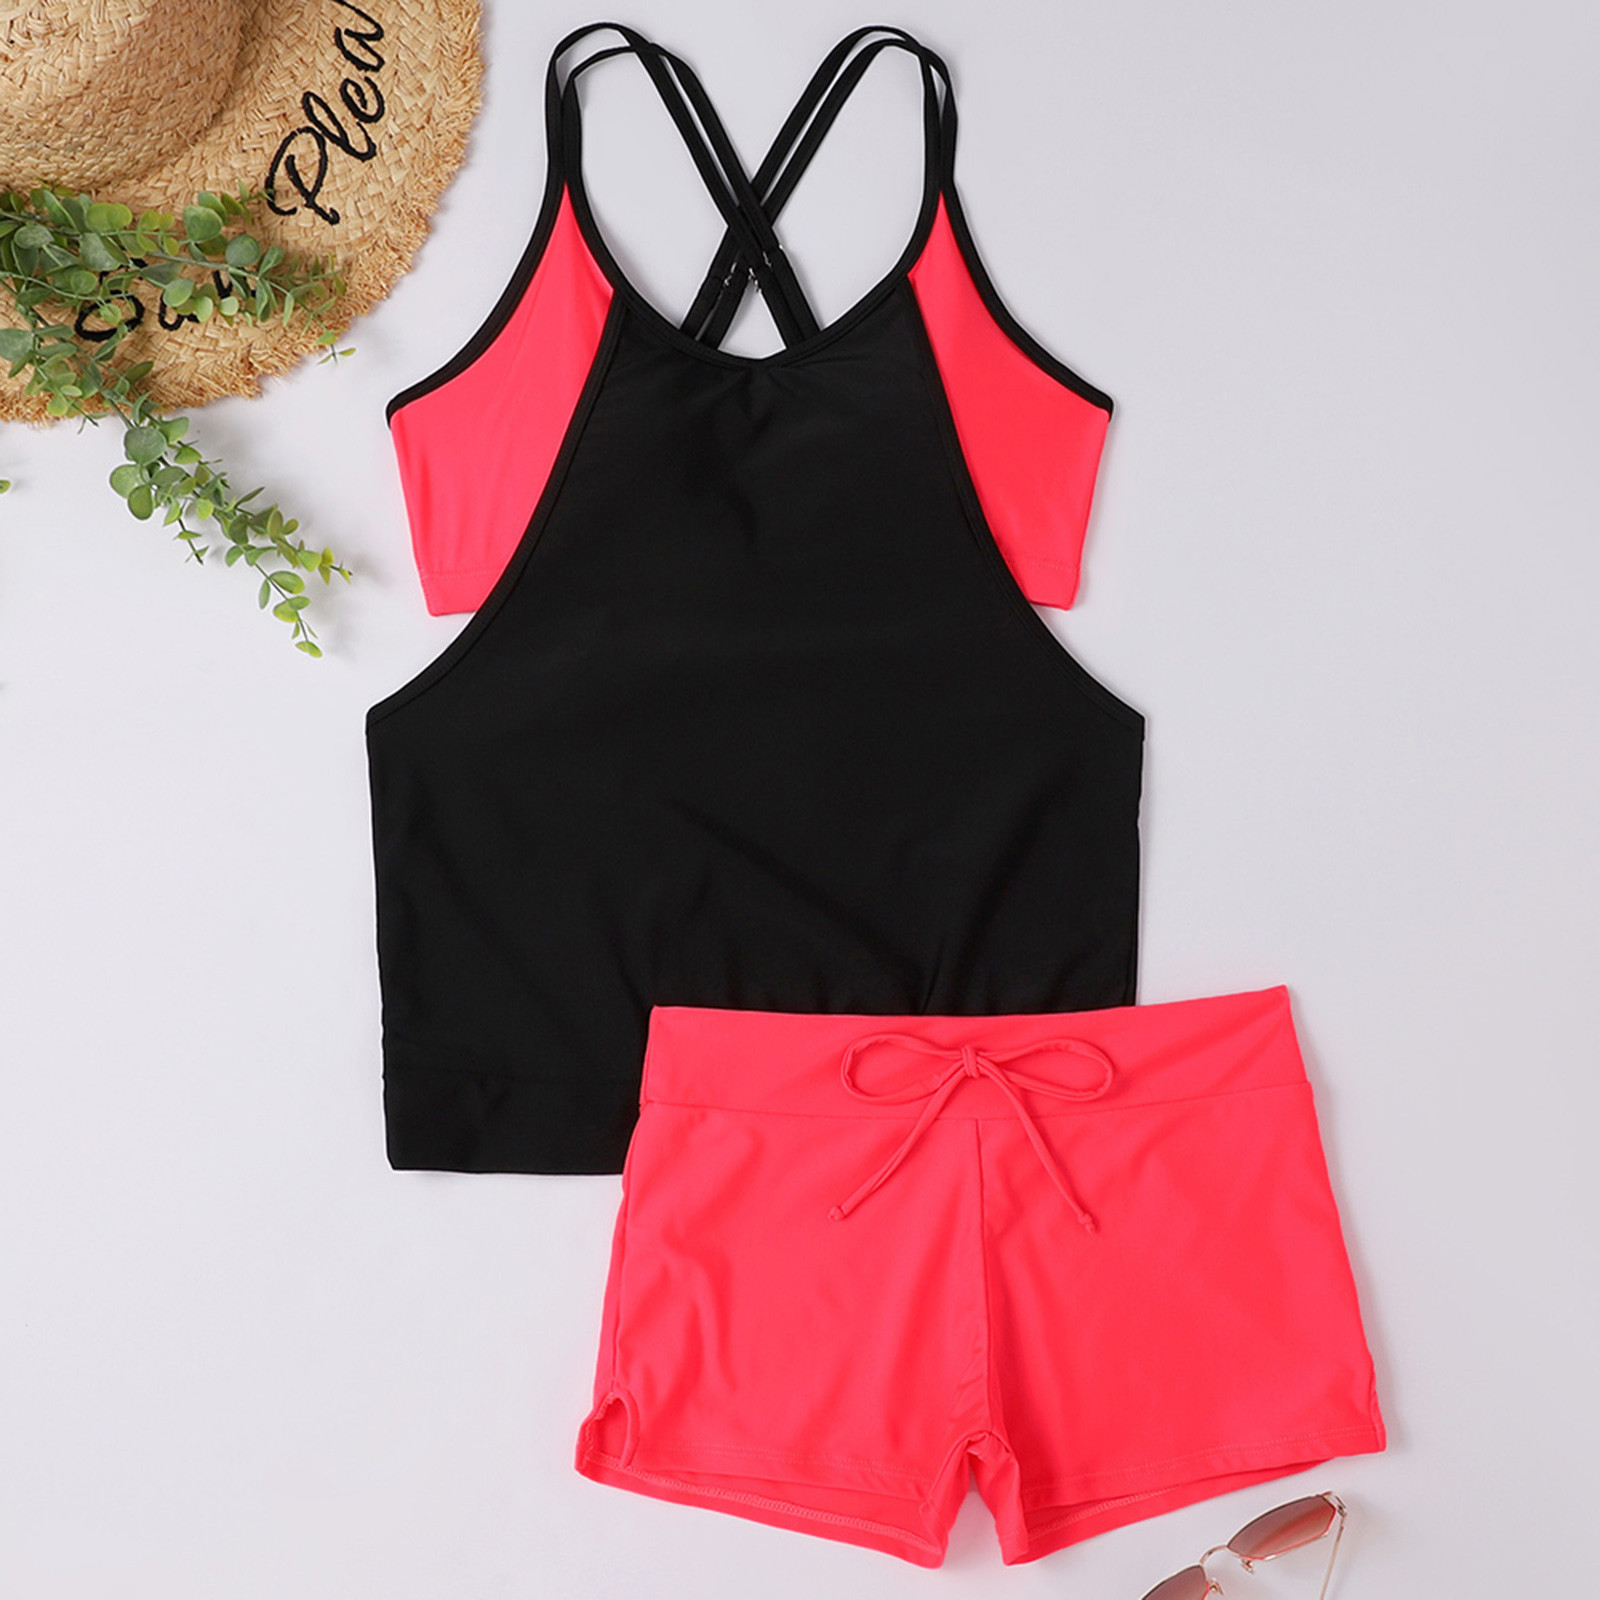 Two Piece Tankini Swimsuits For Women Tank Top With Boyshorts Bathing Suits